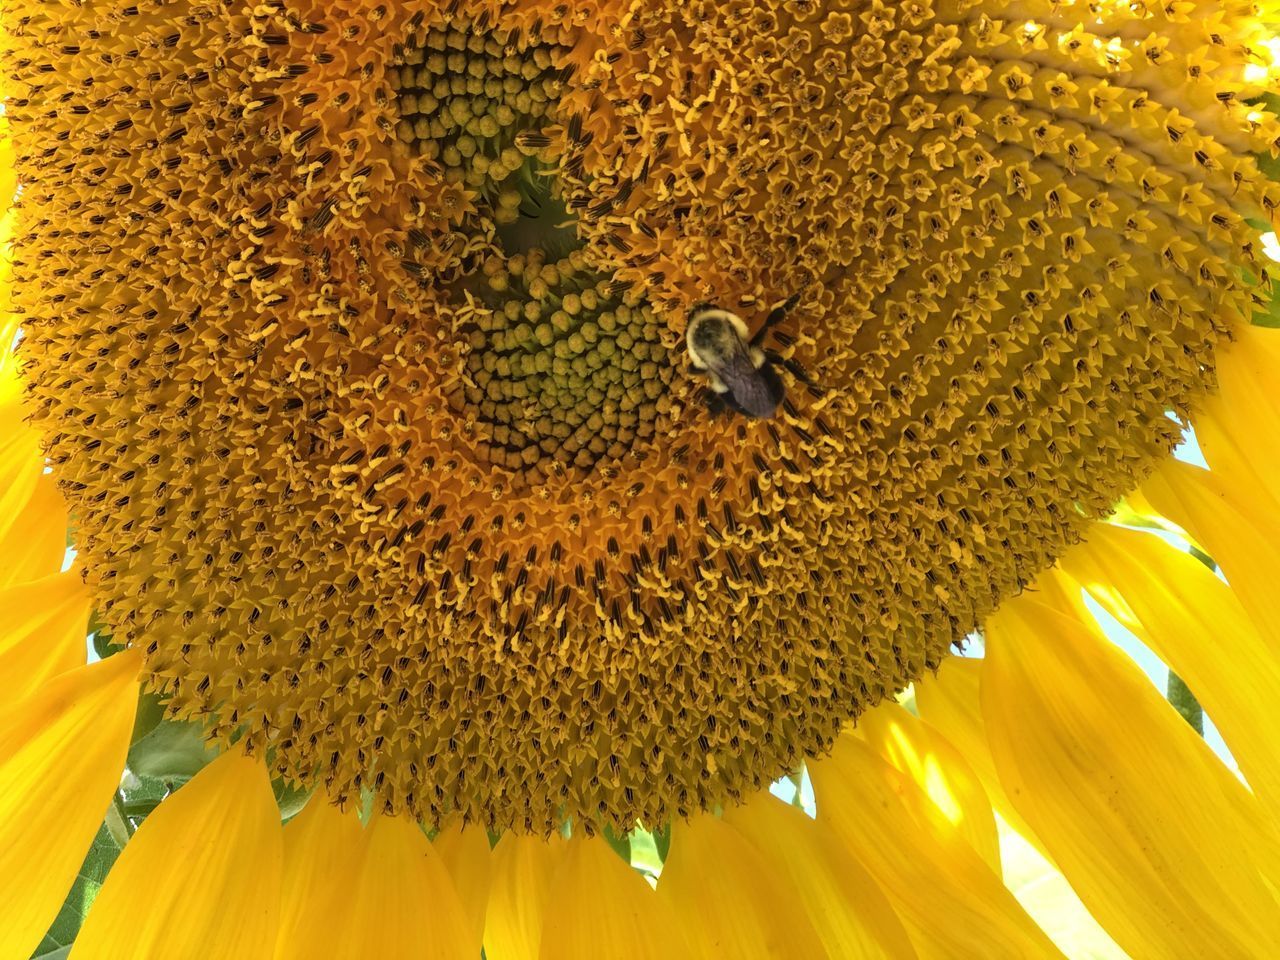 HIGH ANGLE VIEW OF SUNFLOWER ON YELLOW FLOWER